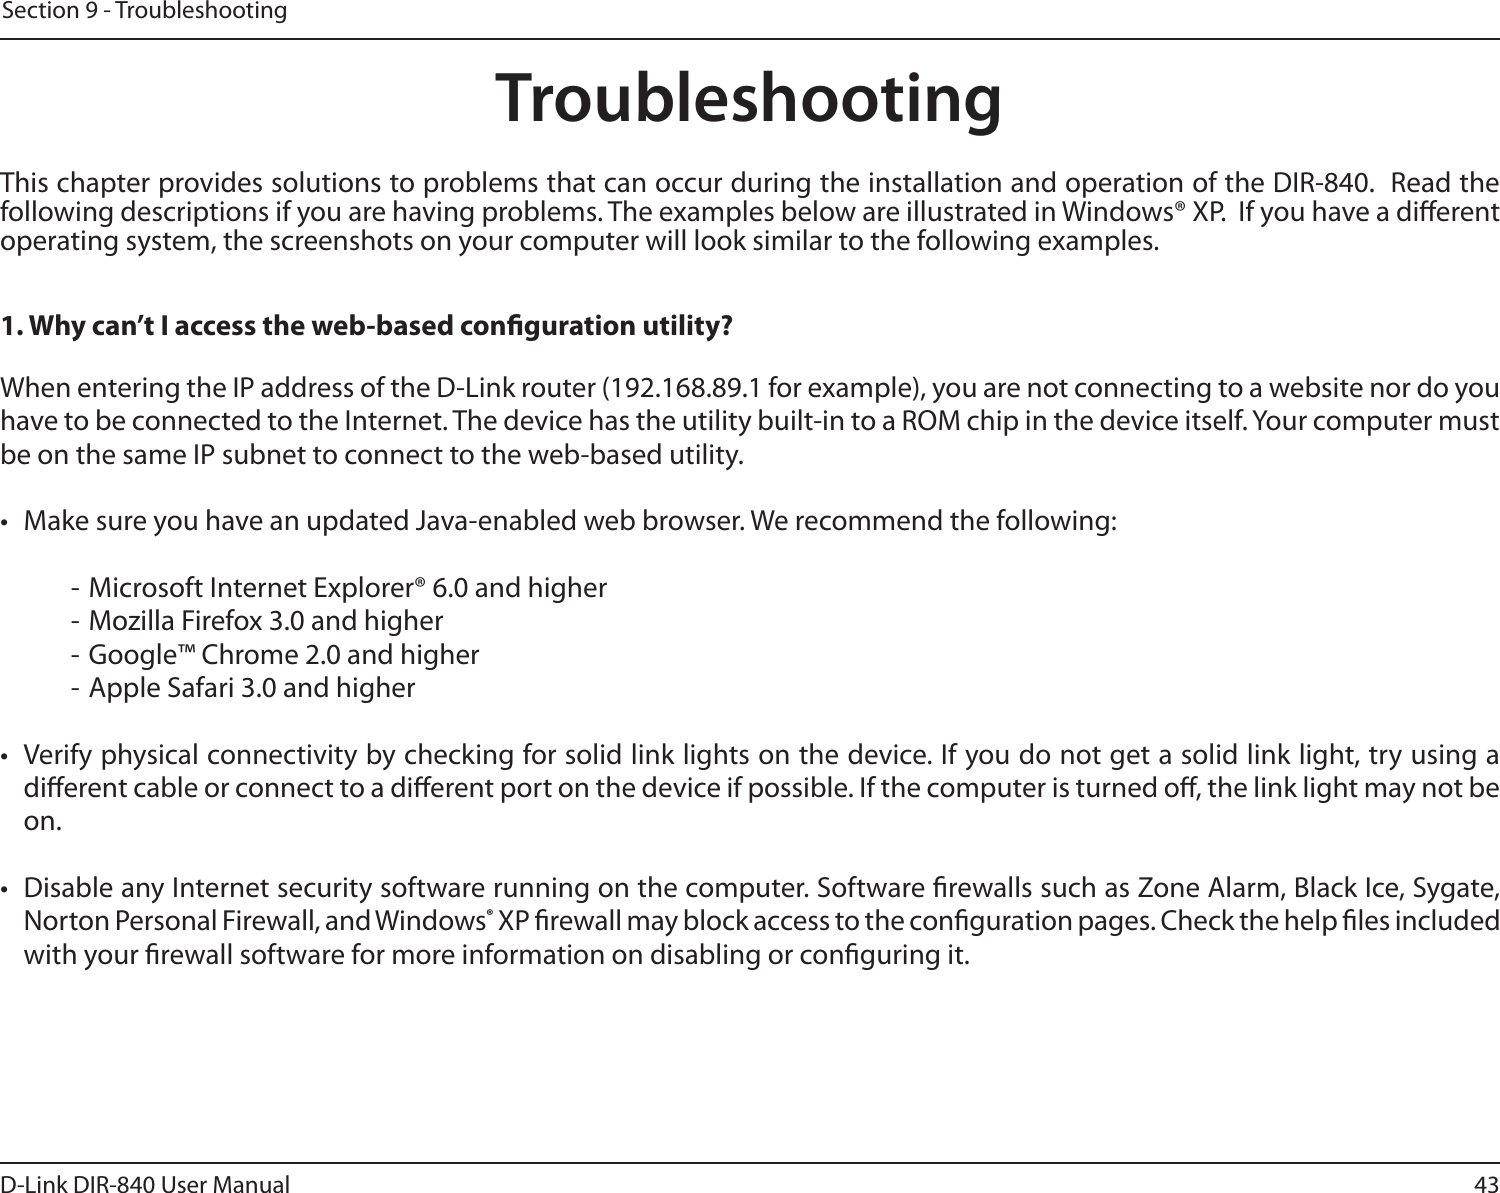 43D-Link DIR-840 User ManualSection 9 - TroubleshootingTroubleshootingThis chapter provides solutions to problems that can occur during the installation and operation of the DIR-840.  Read the following descriptions if you are having problems. The examples below are illustrated in Windows® XP.  If you have a dierent operating system, the screenshots on your computer will look similar to the following examples.1. Why can’t I access the web-based conguration utility?When entering the IP address of the D-Link router (192.168.89.1 for example), you are not connecting to a website nor do you have to be connected to the Internet. The device has the utility built-in to a ROM chip in the device itself. Your computer must be on the same IP subnet to connect to the web-based utility. •  Make sure you have an updated Java-enabled web browser. We recommend the following:  - Microsoft Internet Explorer® 6.0 and higher- Mozilla Firefox 3.0 and higher- Google™ Chrome 2.0 and higher- Apple Safari 3.0 and higher•  Verify physical connectivity by checking for solid link lights on the device. If you do not get a solid link light, try using a dierent cable or connect to a dierent port on the device if possible. If the computer is turned o, the link light may not be on.•  Disable any Internet security software running on the computer. Software rewalls such as Zone Alarm, Black Ice, Sygate, Norton Personal Firewall, and Windows® XP rewall may block access to the conguration pages. Check the help les included with your rewall software for more information on disabling or conguring it.